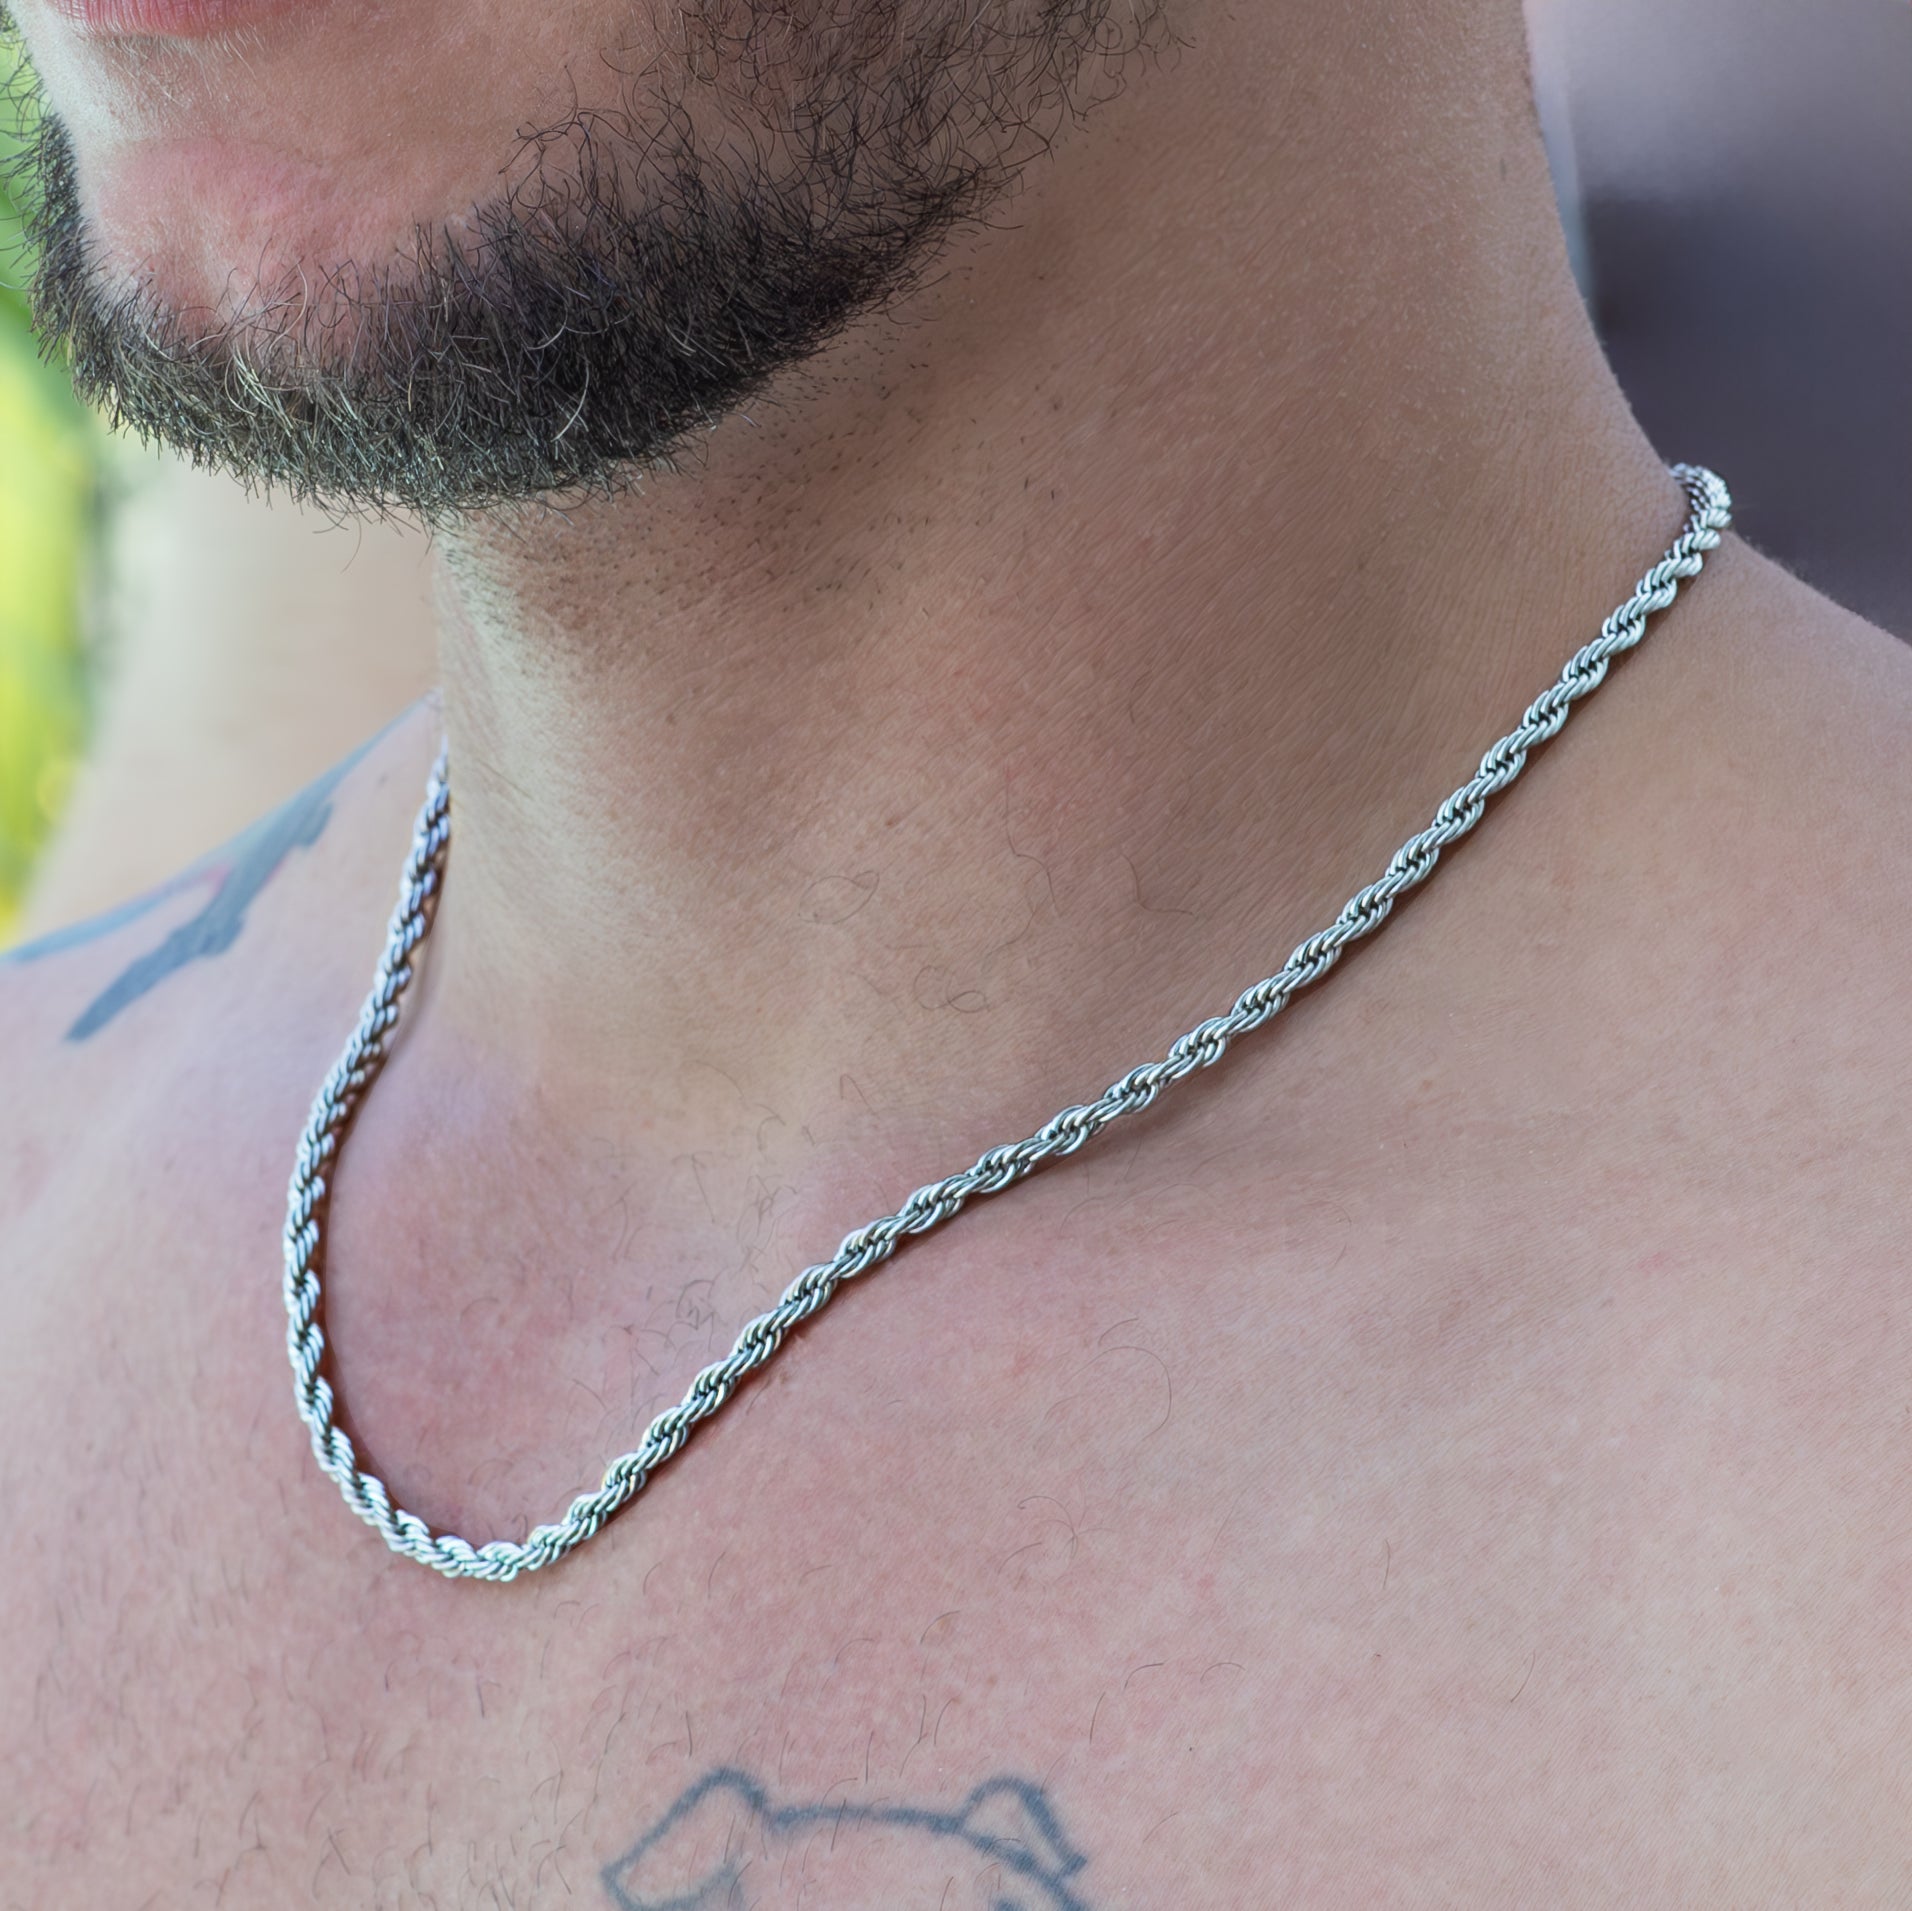 Grady Stainless Steel Rope Chain Necklace